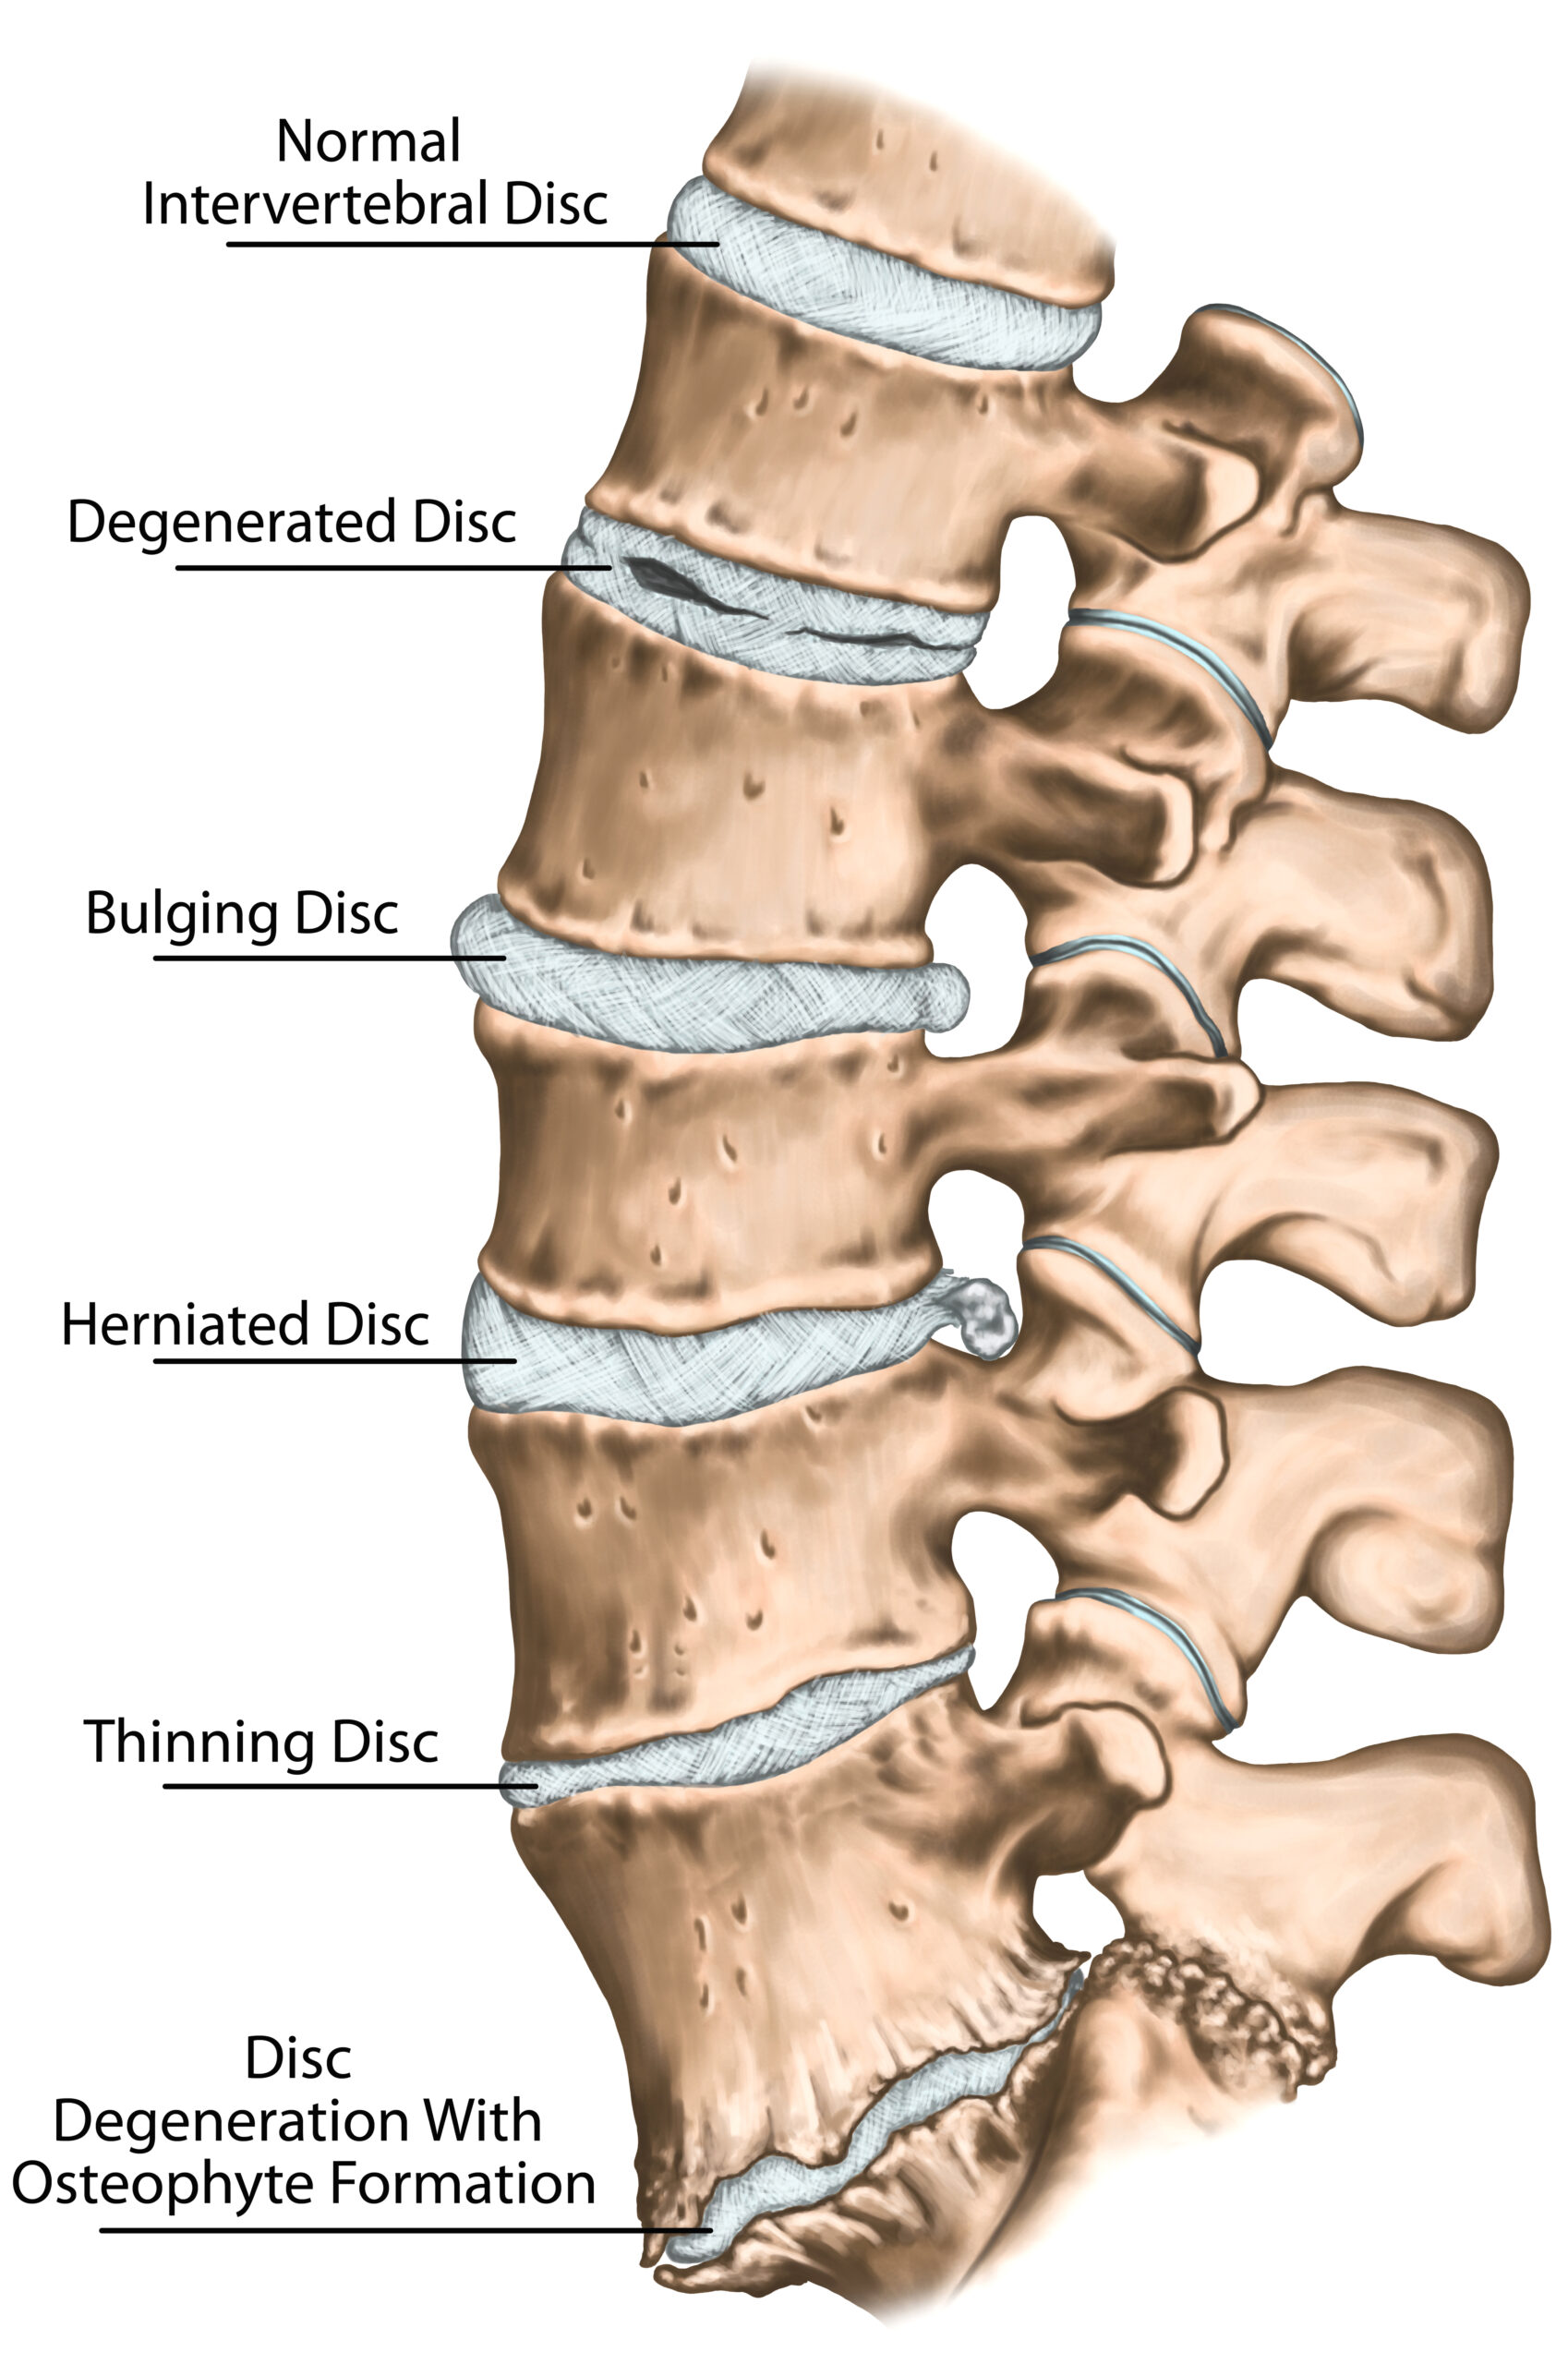 Non-Surgical Spinal Decompression - Human spine showing various problems with the discs